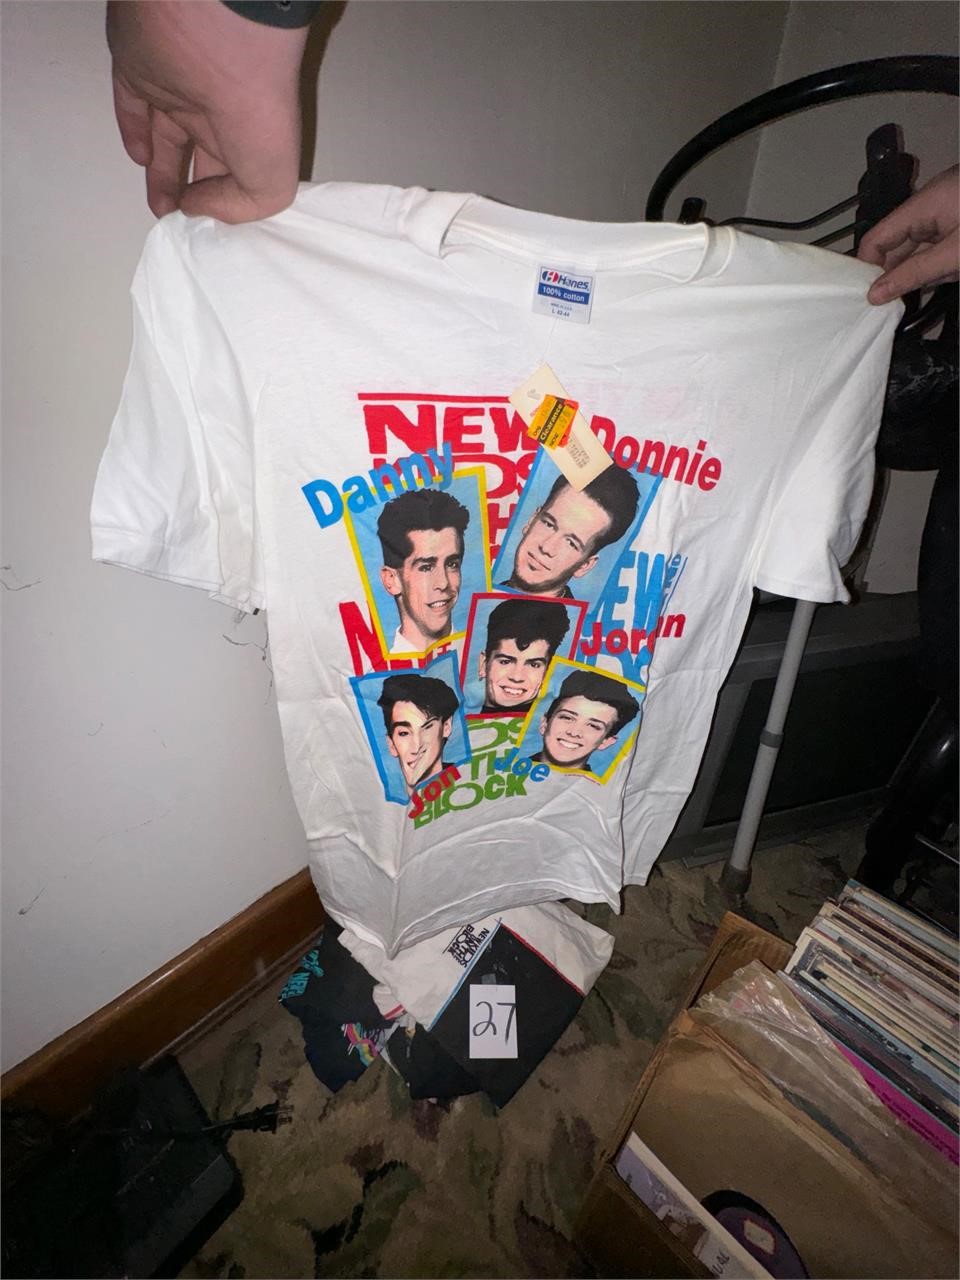 Several New VTG New Kids on the block T-shirts